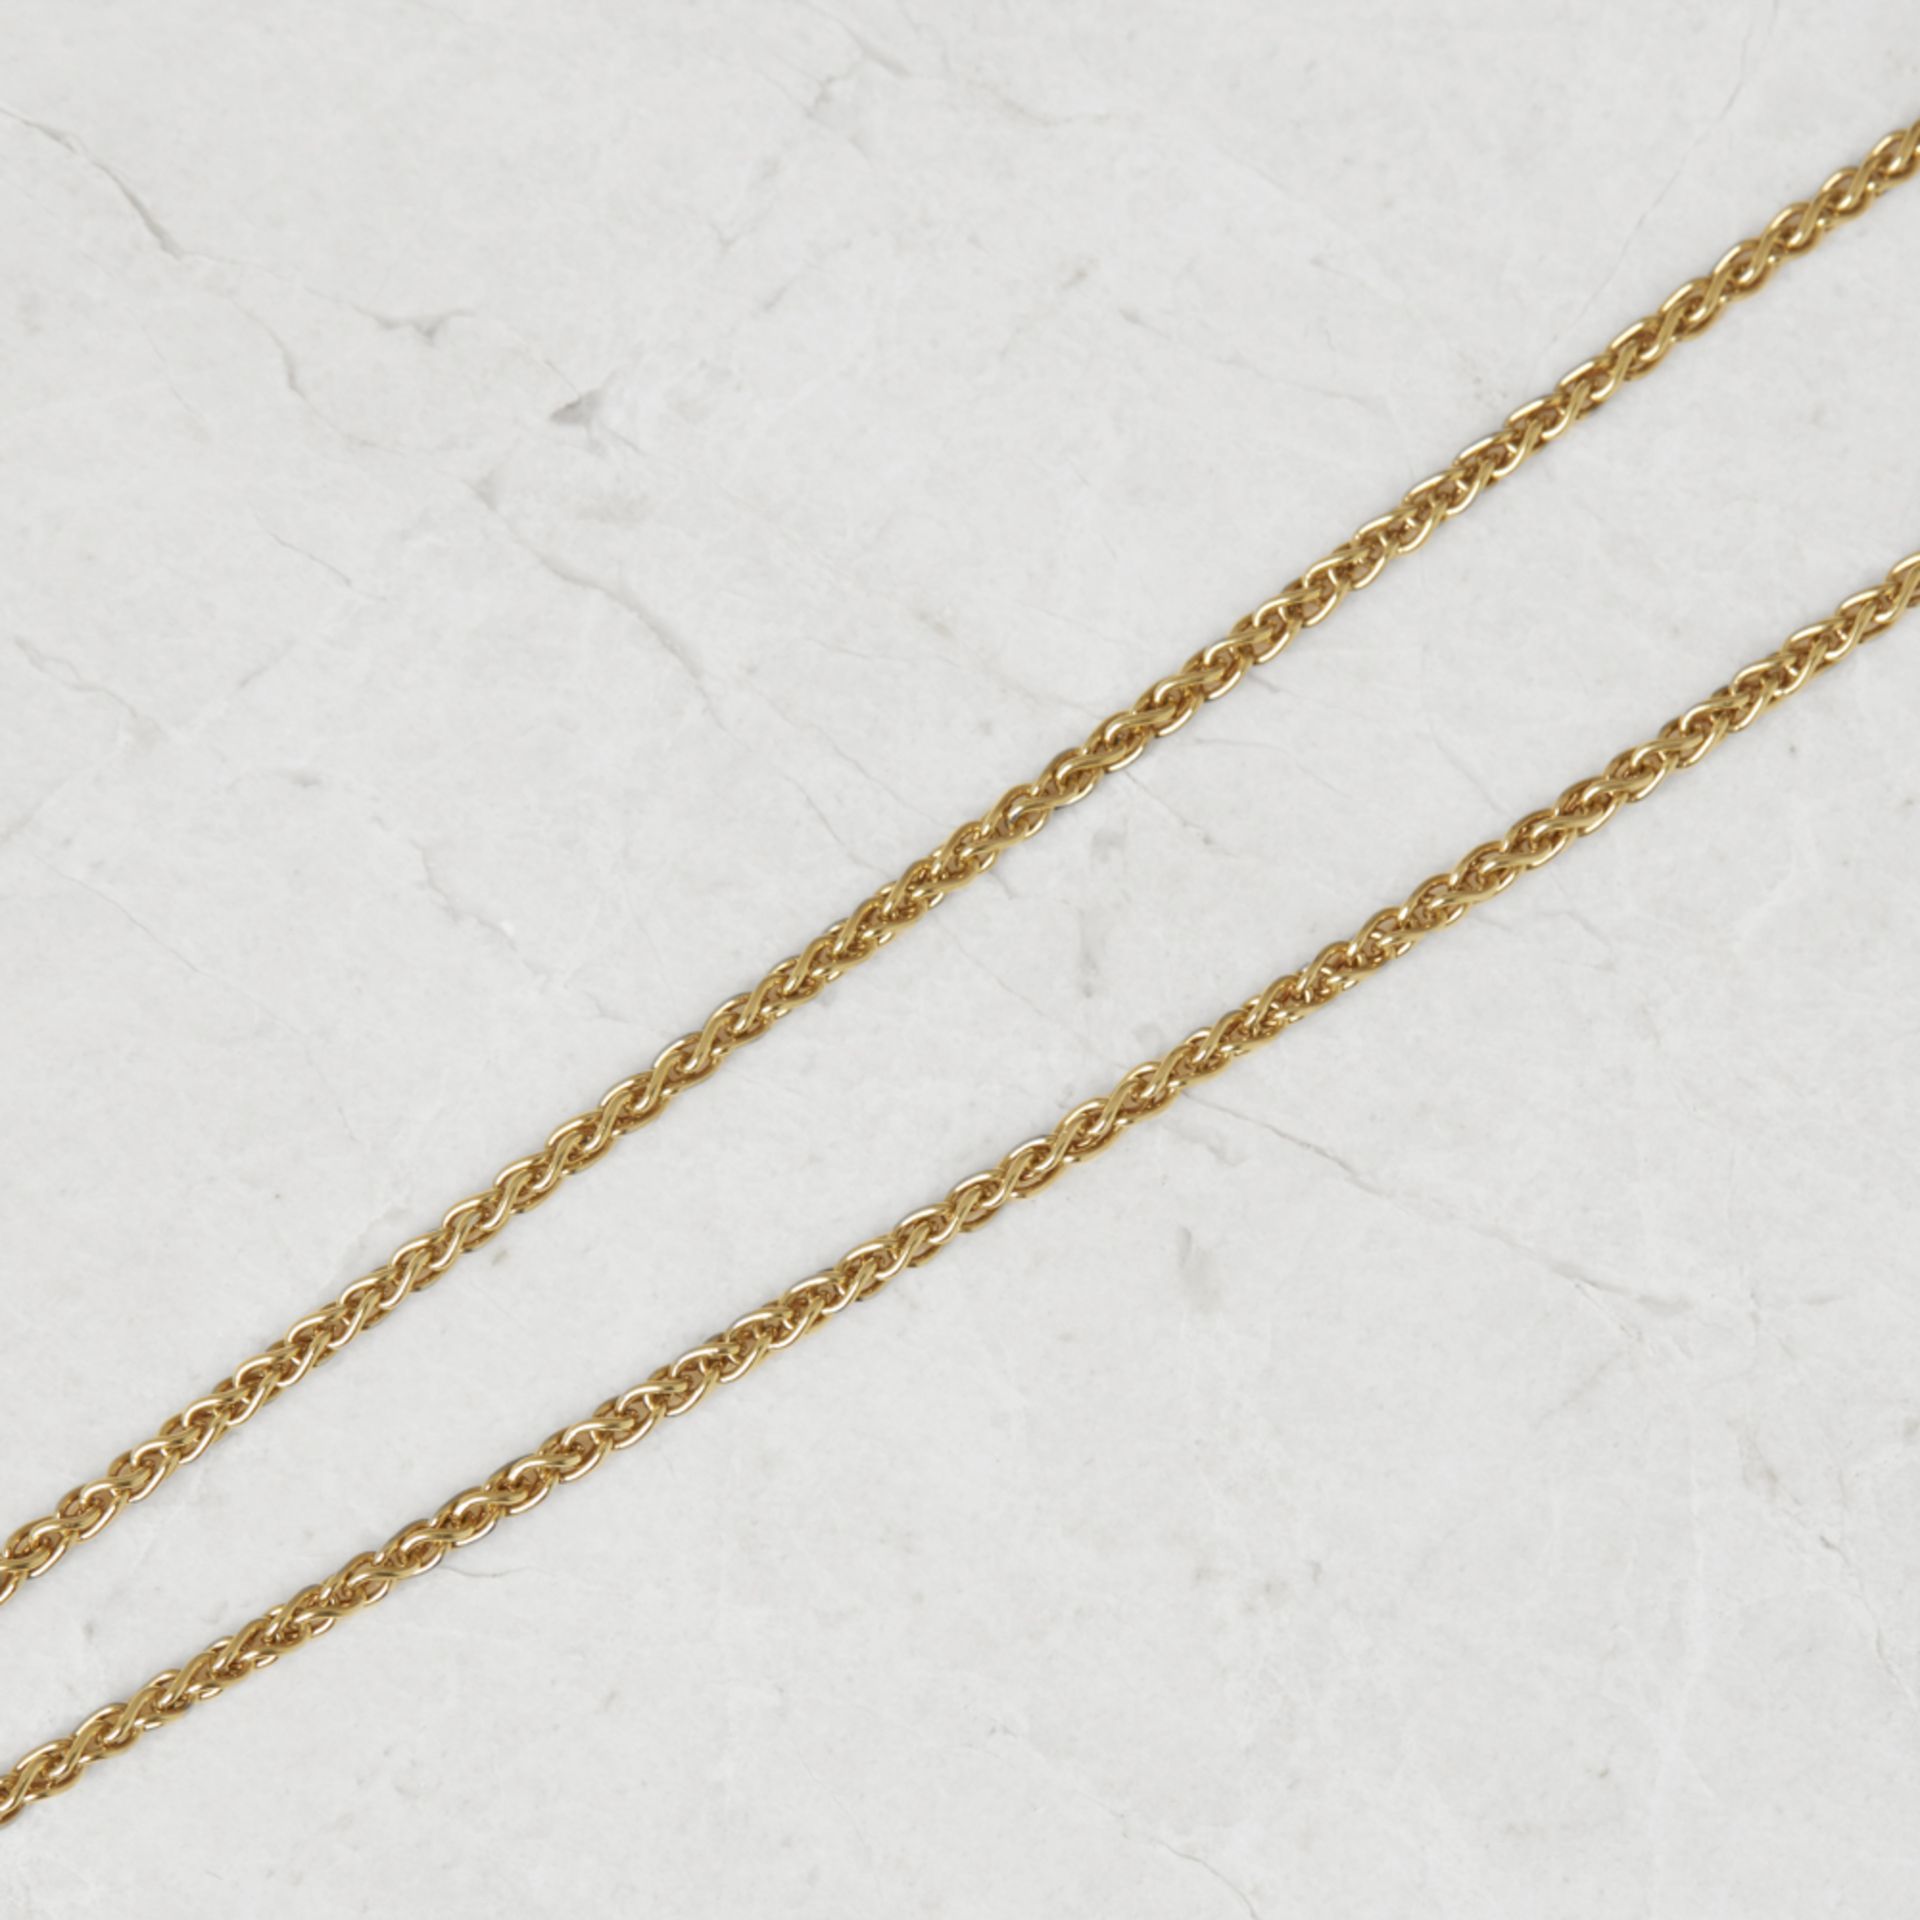 Chopard 18k Yellow Gold Happy Diamonds Necklace - Image 3 of 6